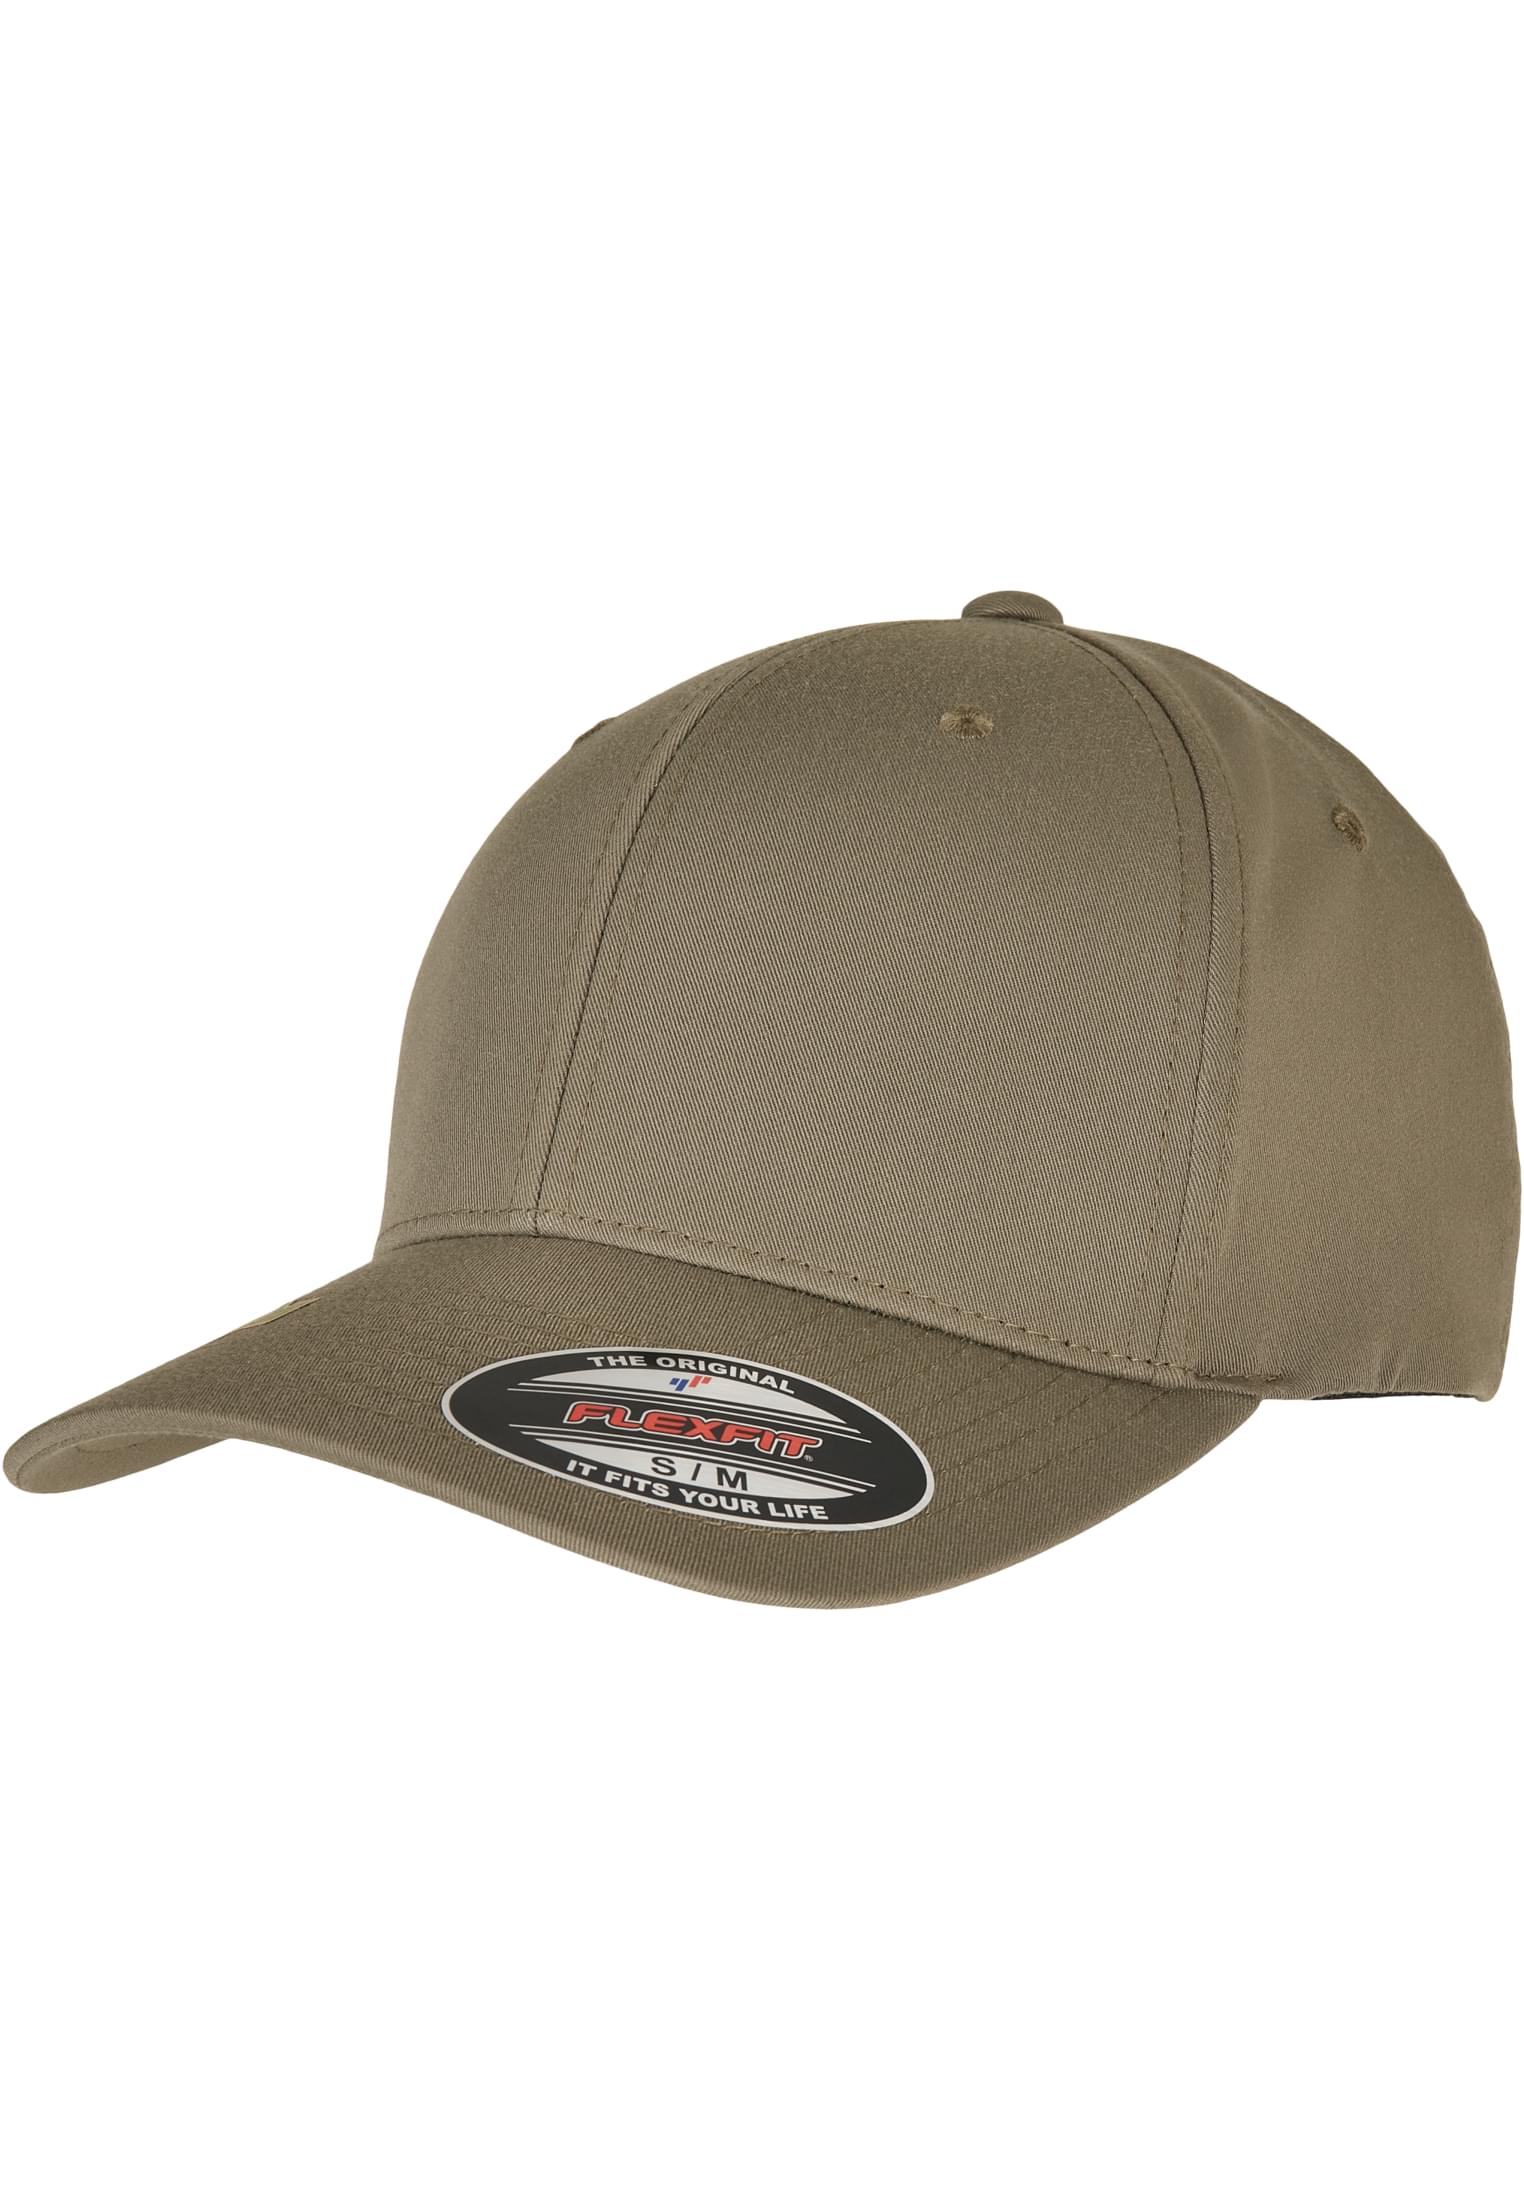 Cap-6277RP Flexfit Polyester Recycled